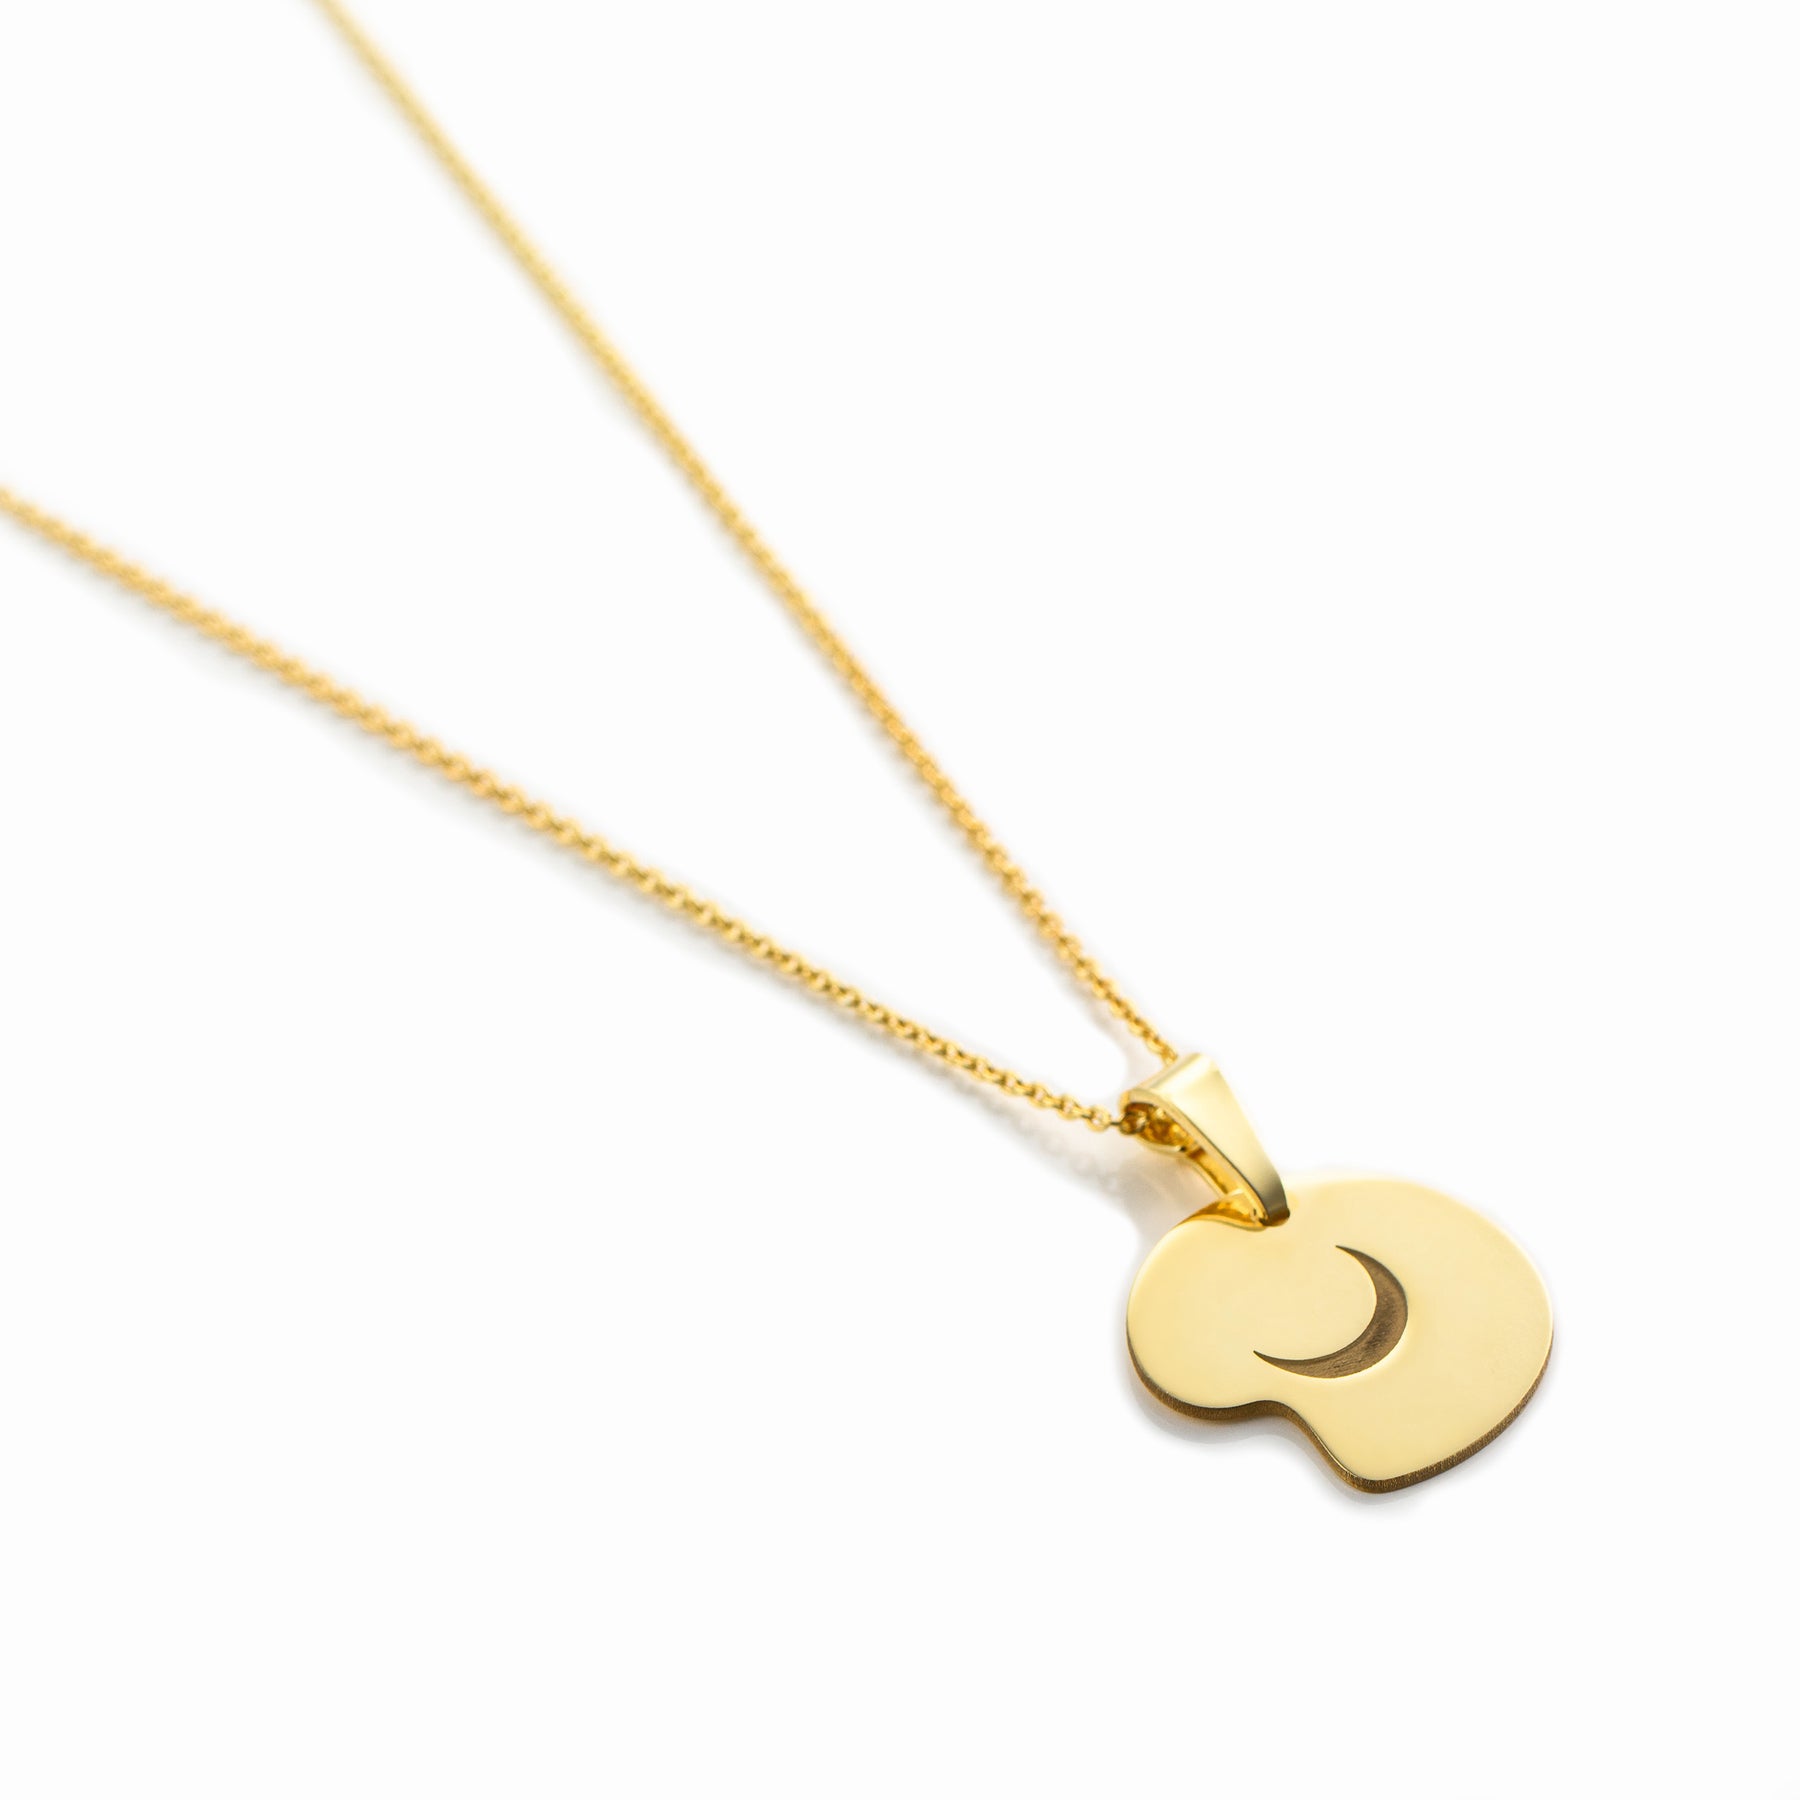 Lost in Dreams Necklace, gold plated